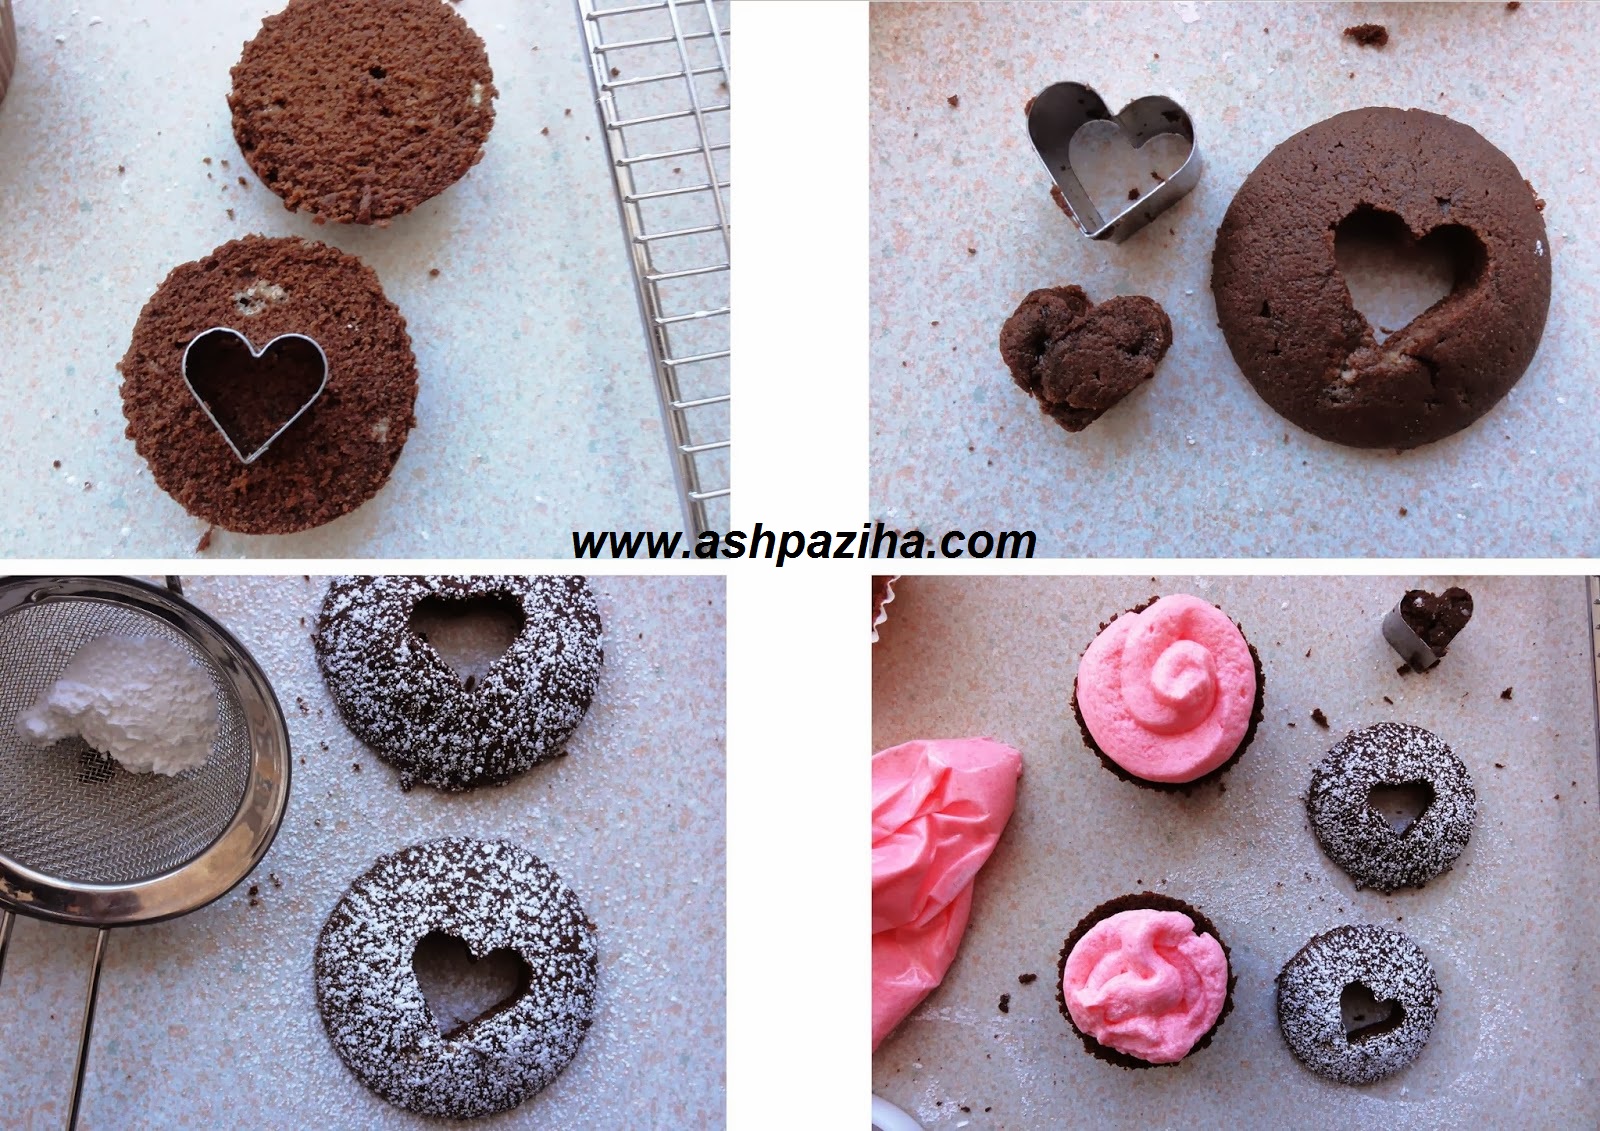 Recipe - Cup - Cakes - Chocolate - heart - shaped - the training - image (3)